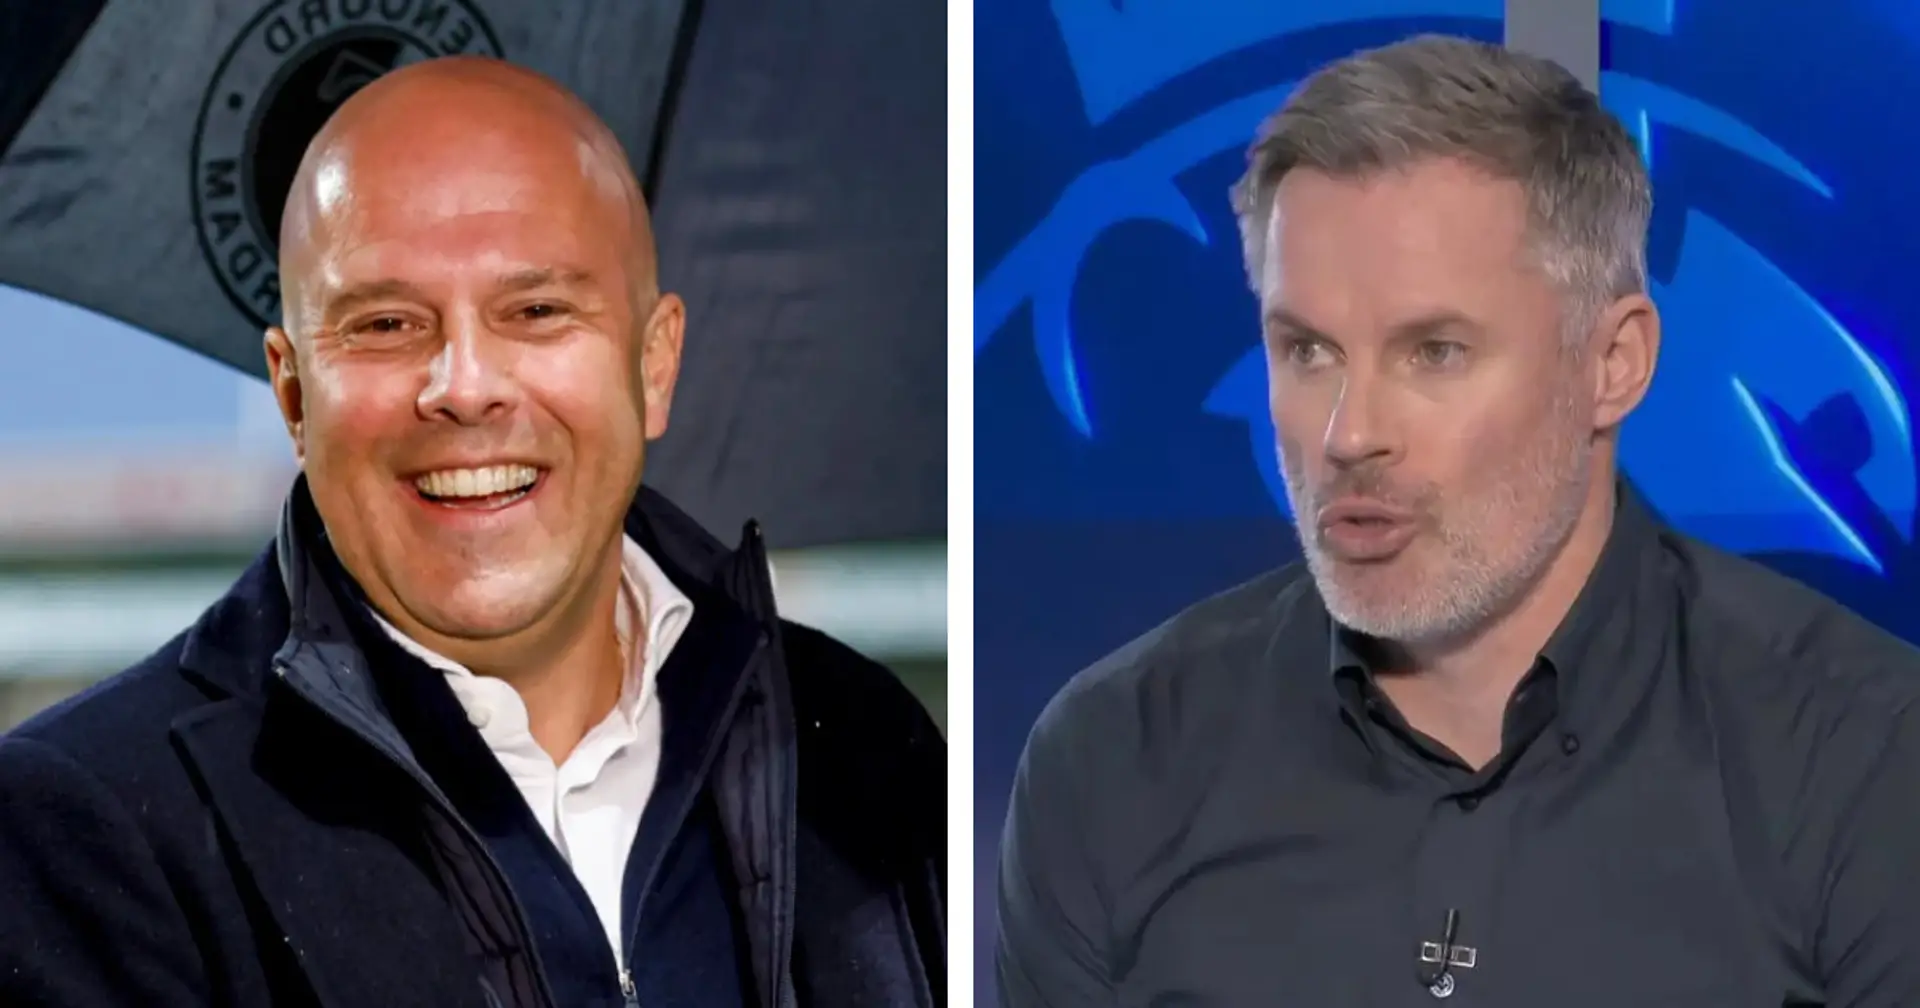 'We're in era of up-and-coming managers': Jamie Carragher explains theory over Arne Slot hiring